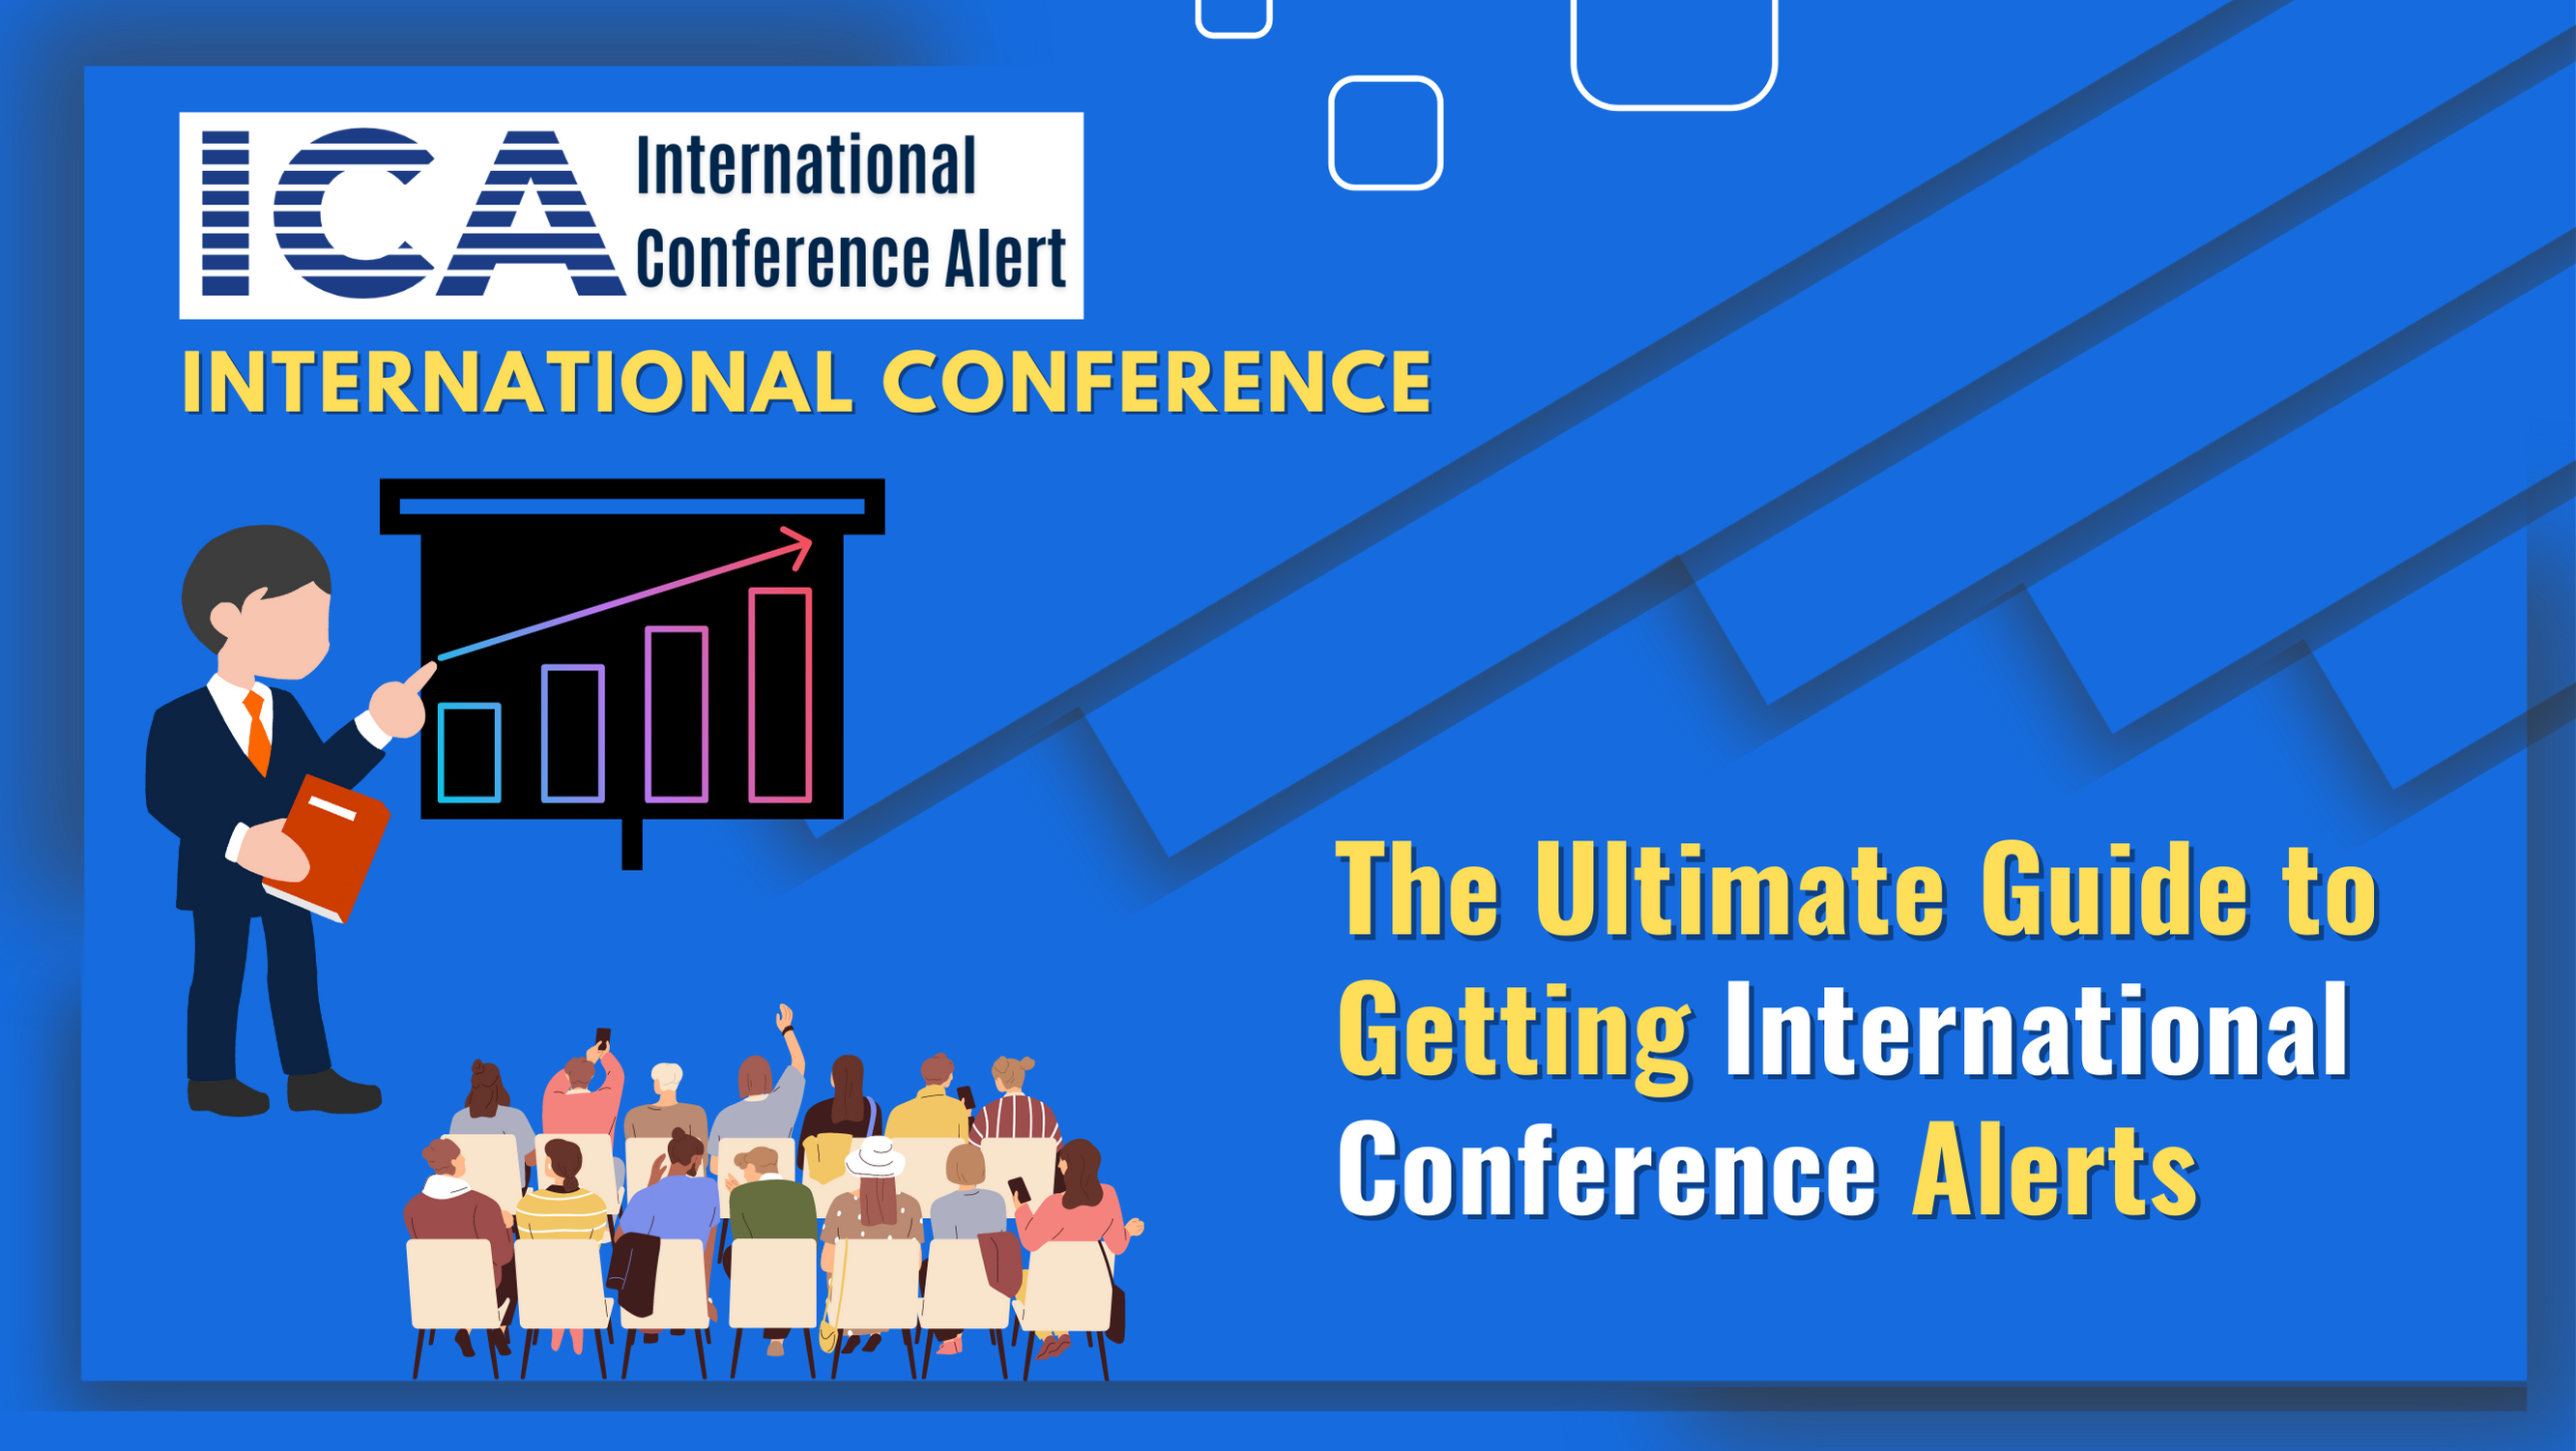  The Ultimate Guide to Getting International Conference Alerts